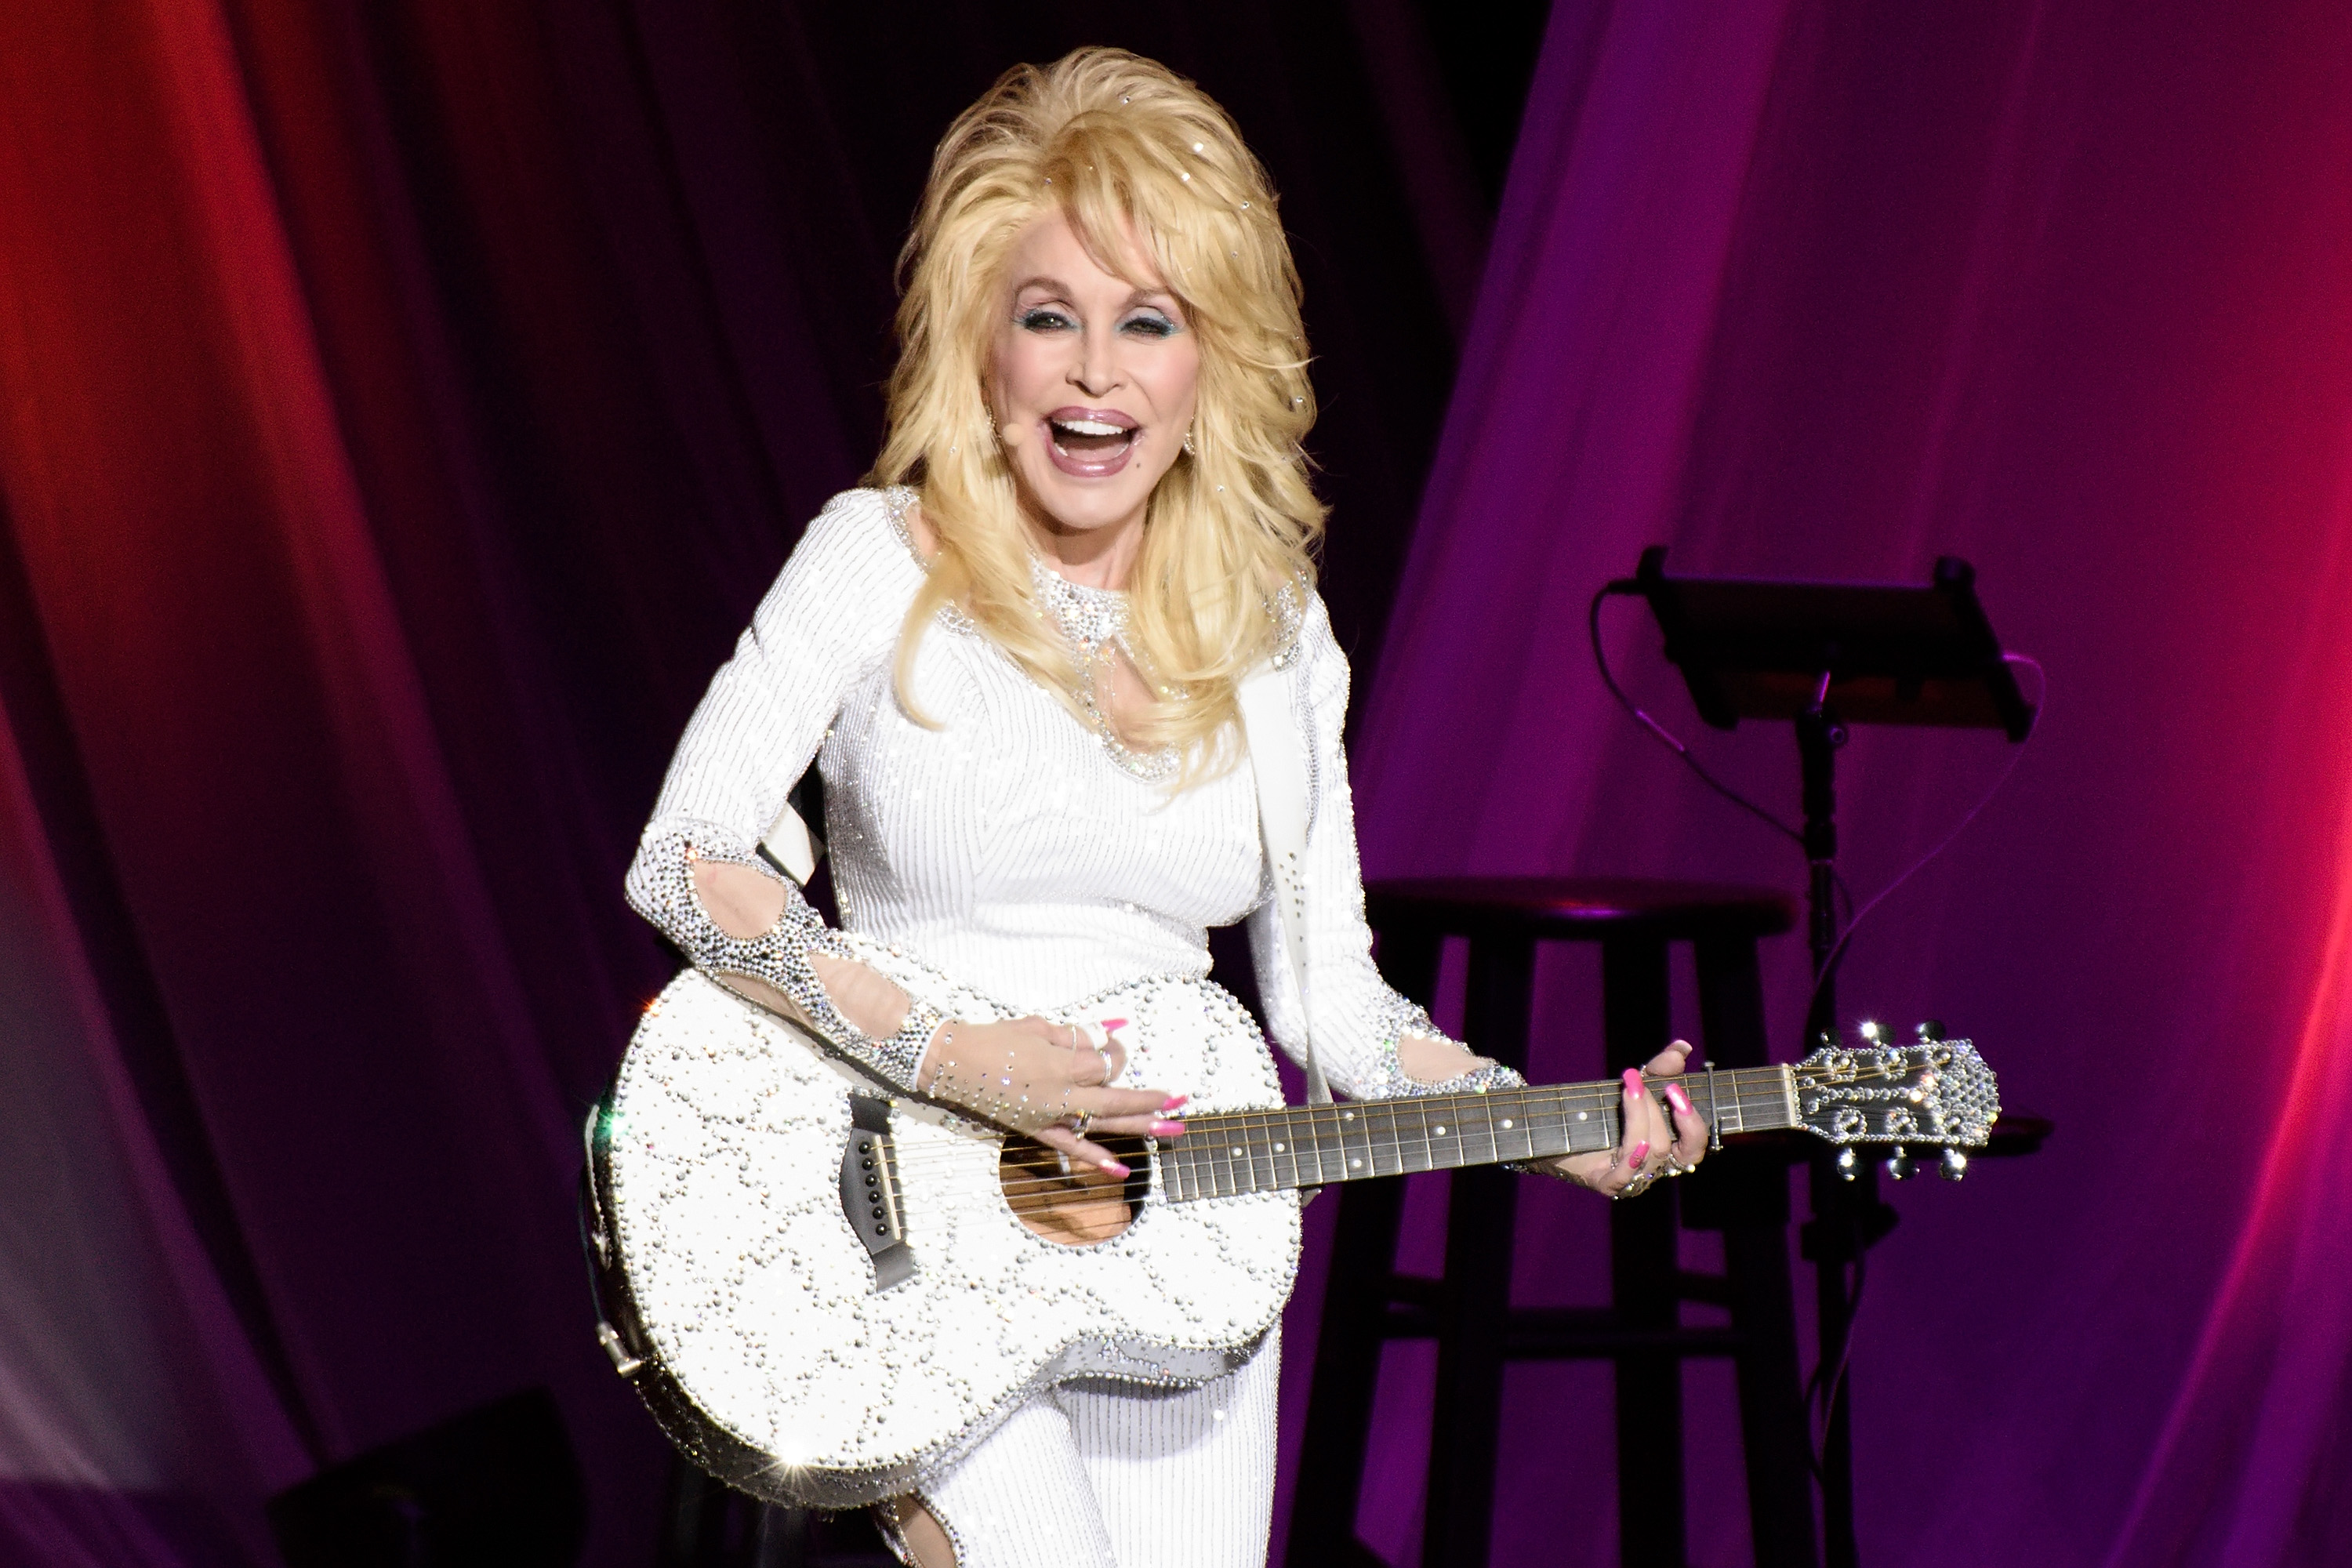 Dolly Parton wears an all-white outfit and strums a white guitar.